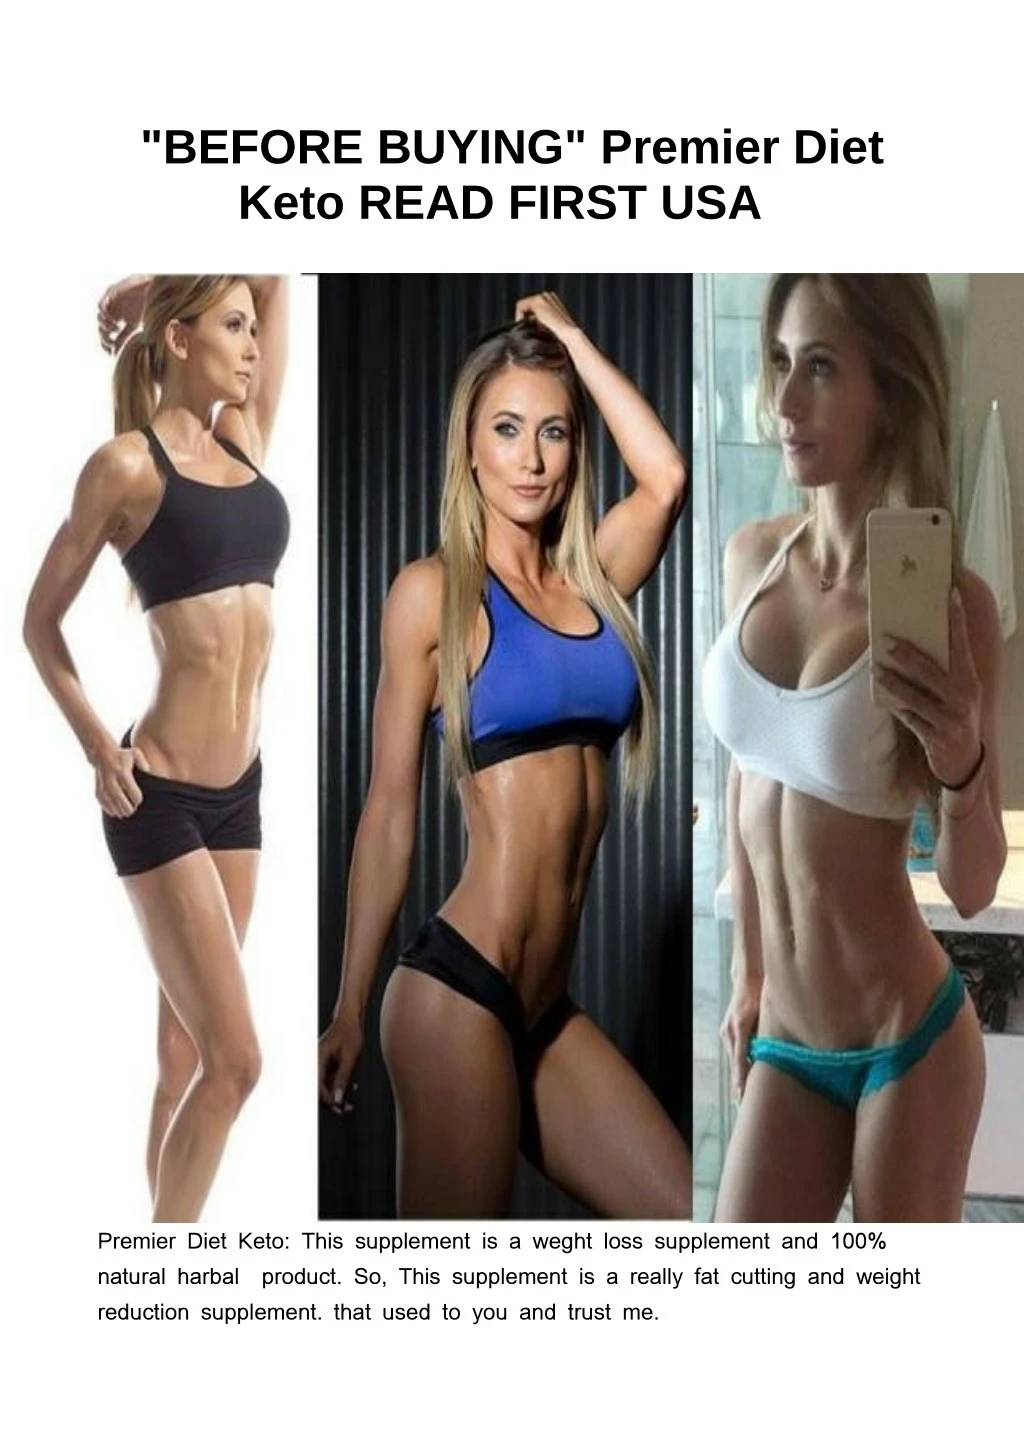 before buying premier diet keto read first usa